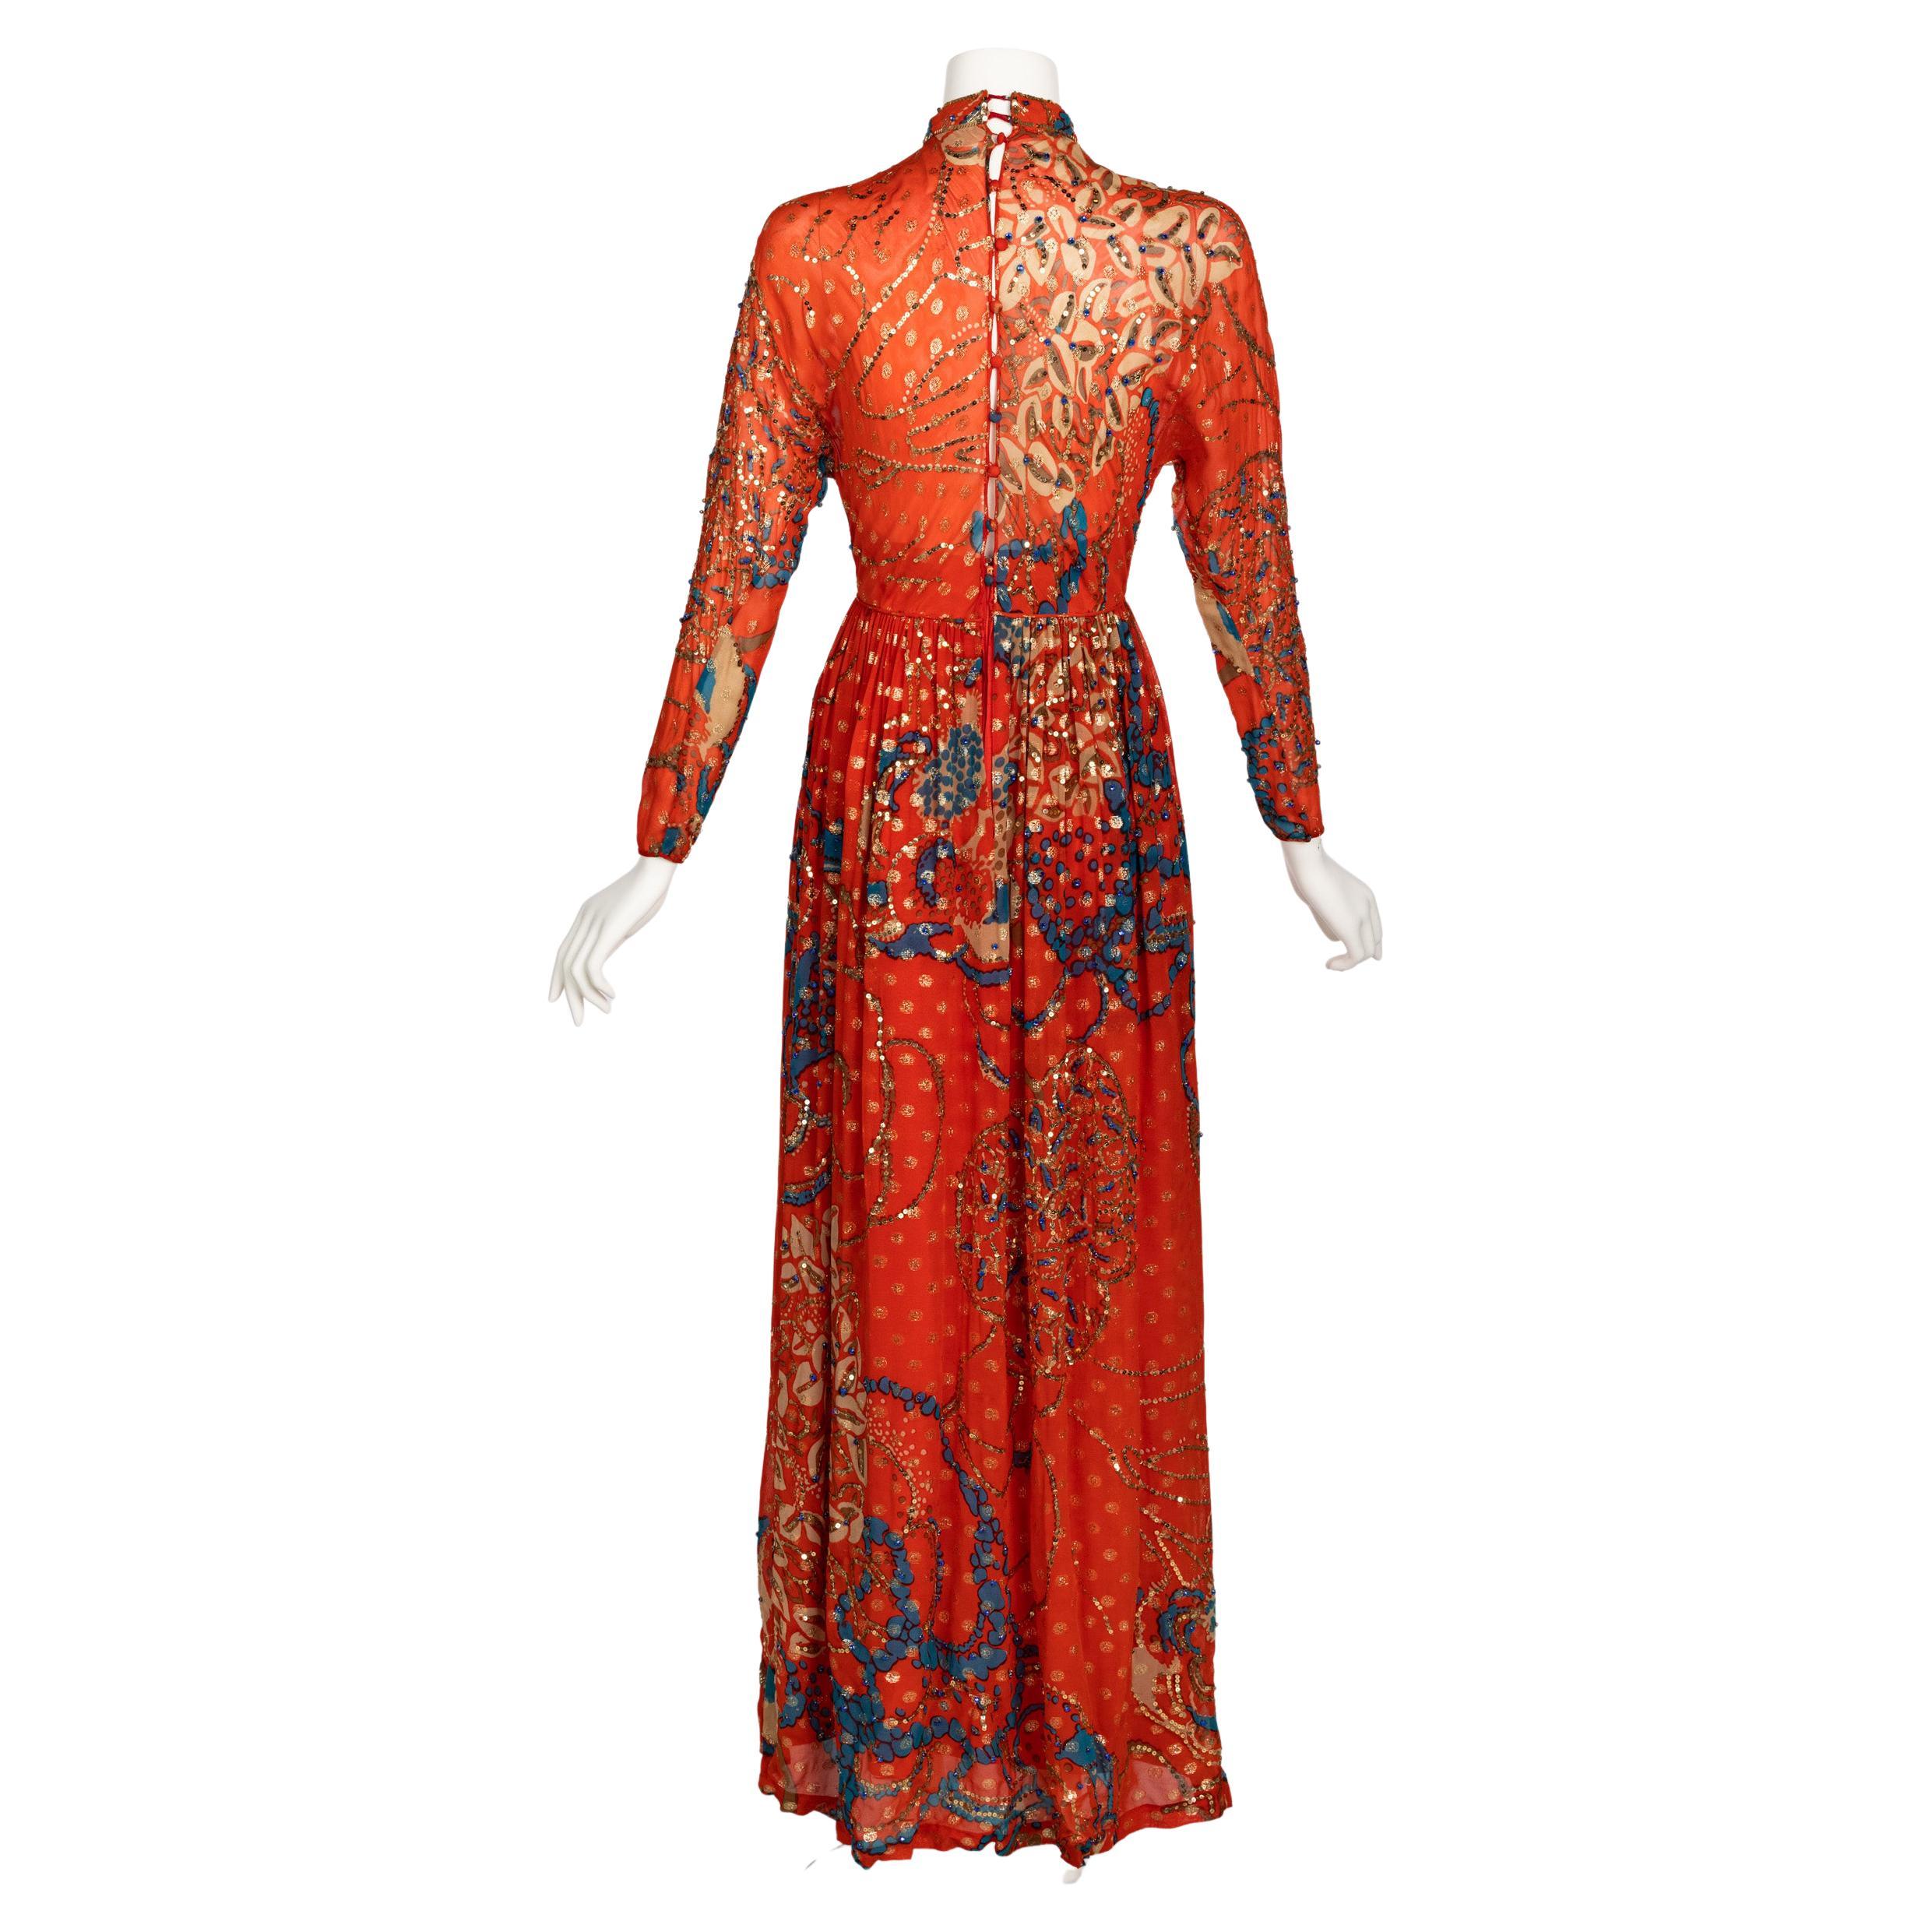 Malcolm Starr Rizkallah Sequined Gold Beaded Red Maxi Dress 1970s For Sale 3